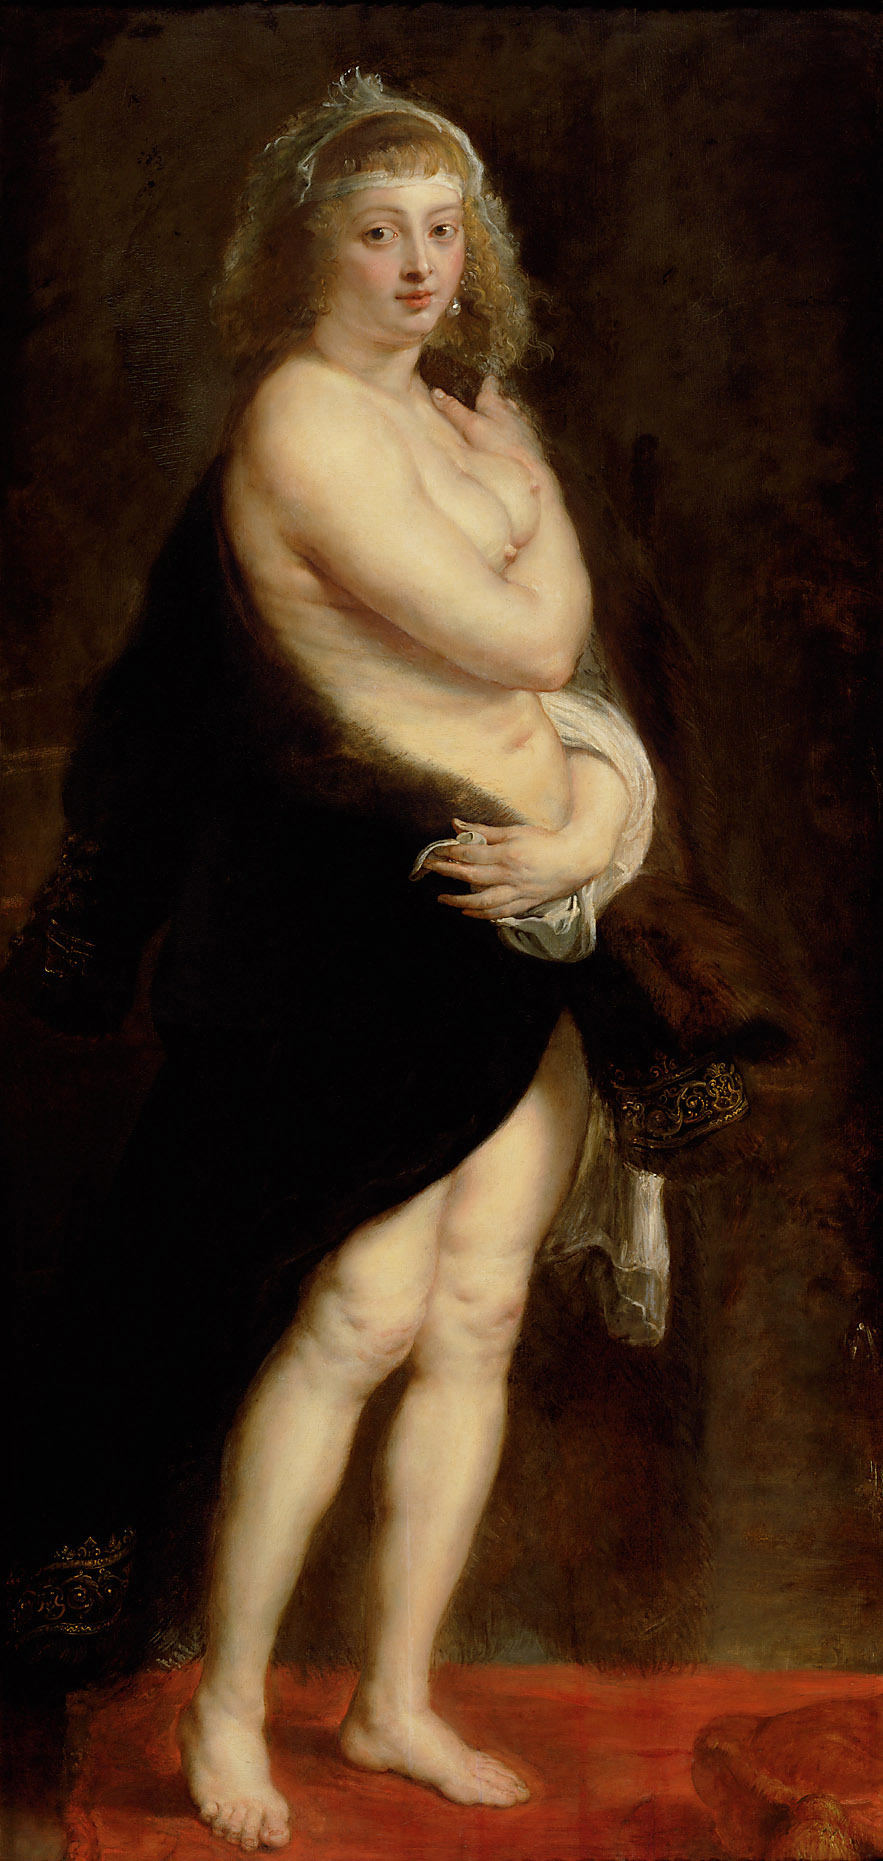 Helena Fourment ("The Fur") by Peter Paul Rubens - Around 1636/1638 - 176 x 83 cm Kunsthistorisches Museum